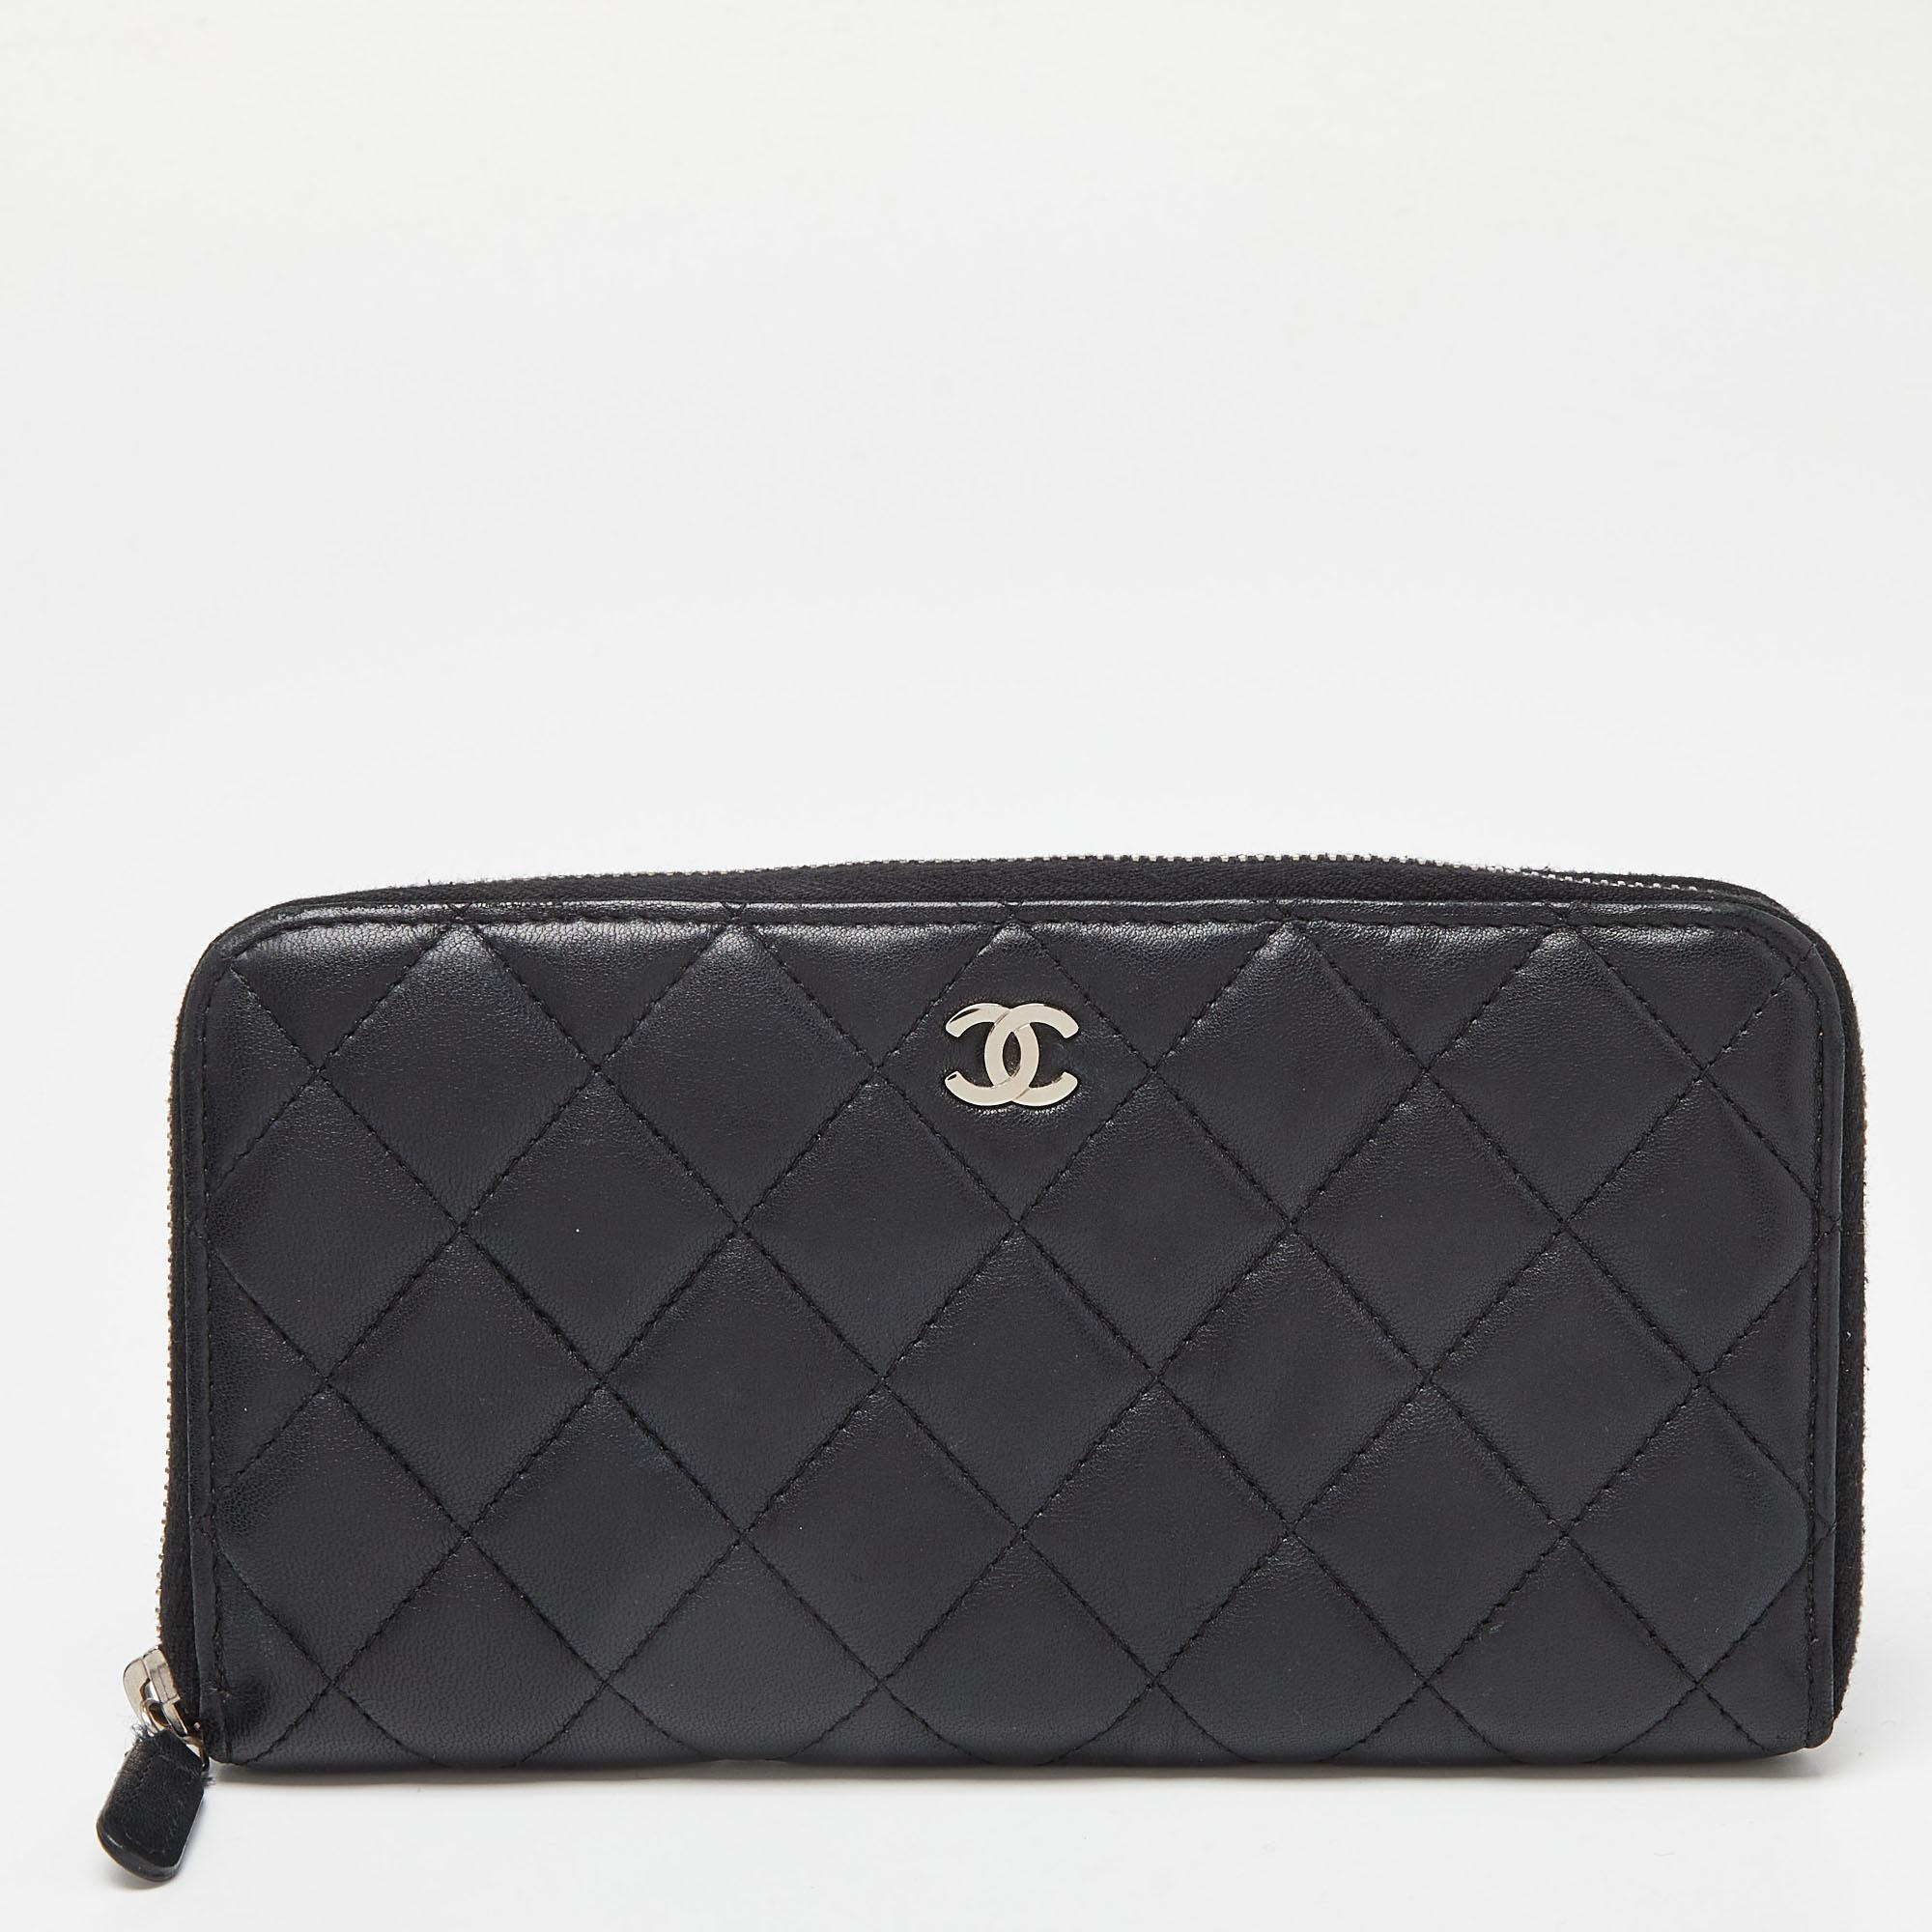 Chanel Black Quilted Leather CC Zip Around Wallet In Good Condition For Sale In Dubai, Al Qouz 2